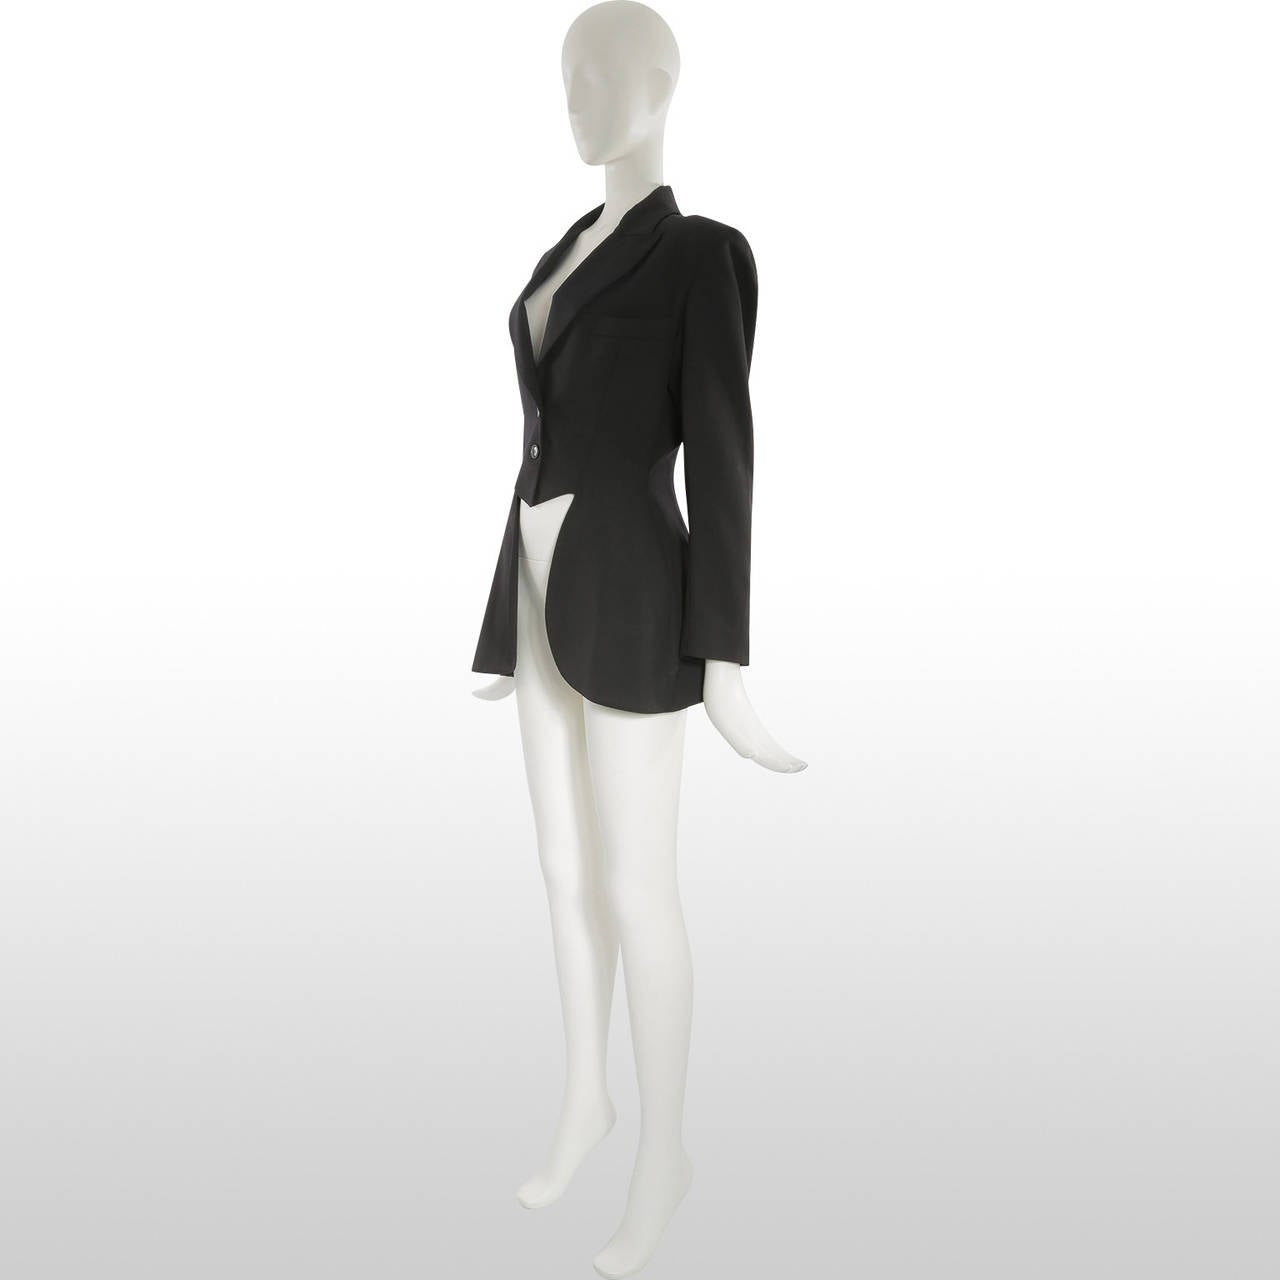 This incredibly cool jacket by Alaia is made in the style of a circus ringmaster for the female form. Its peaked lapels and tails are beautifully tailored with a button to secure the vent at the back. There is a small amount of padding in the